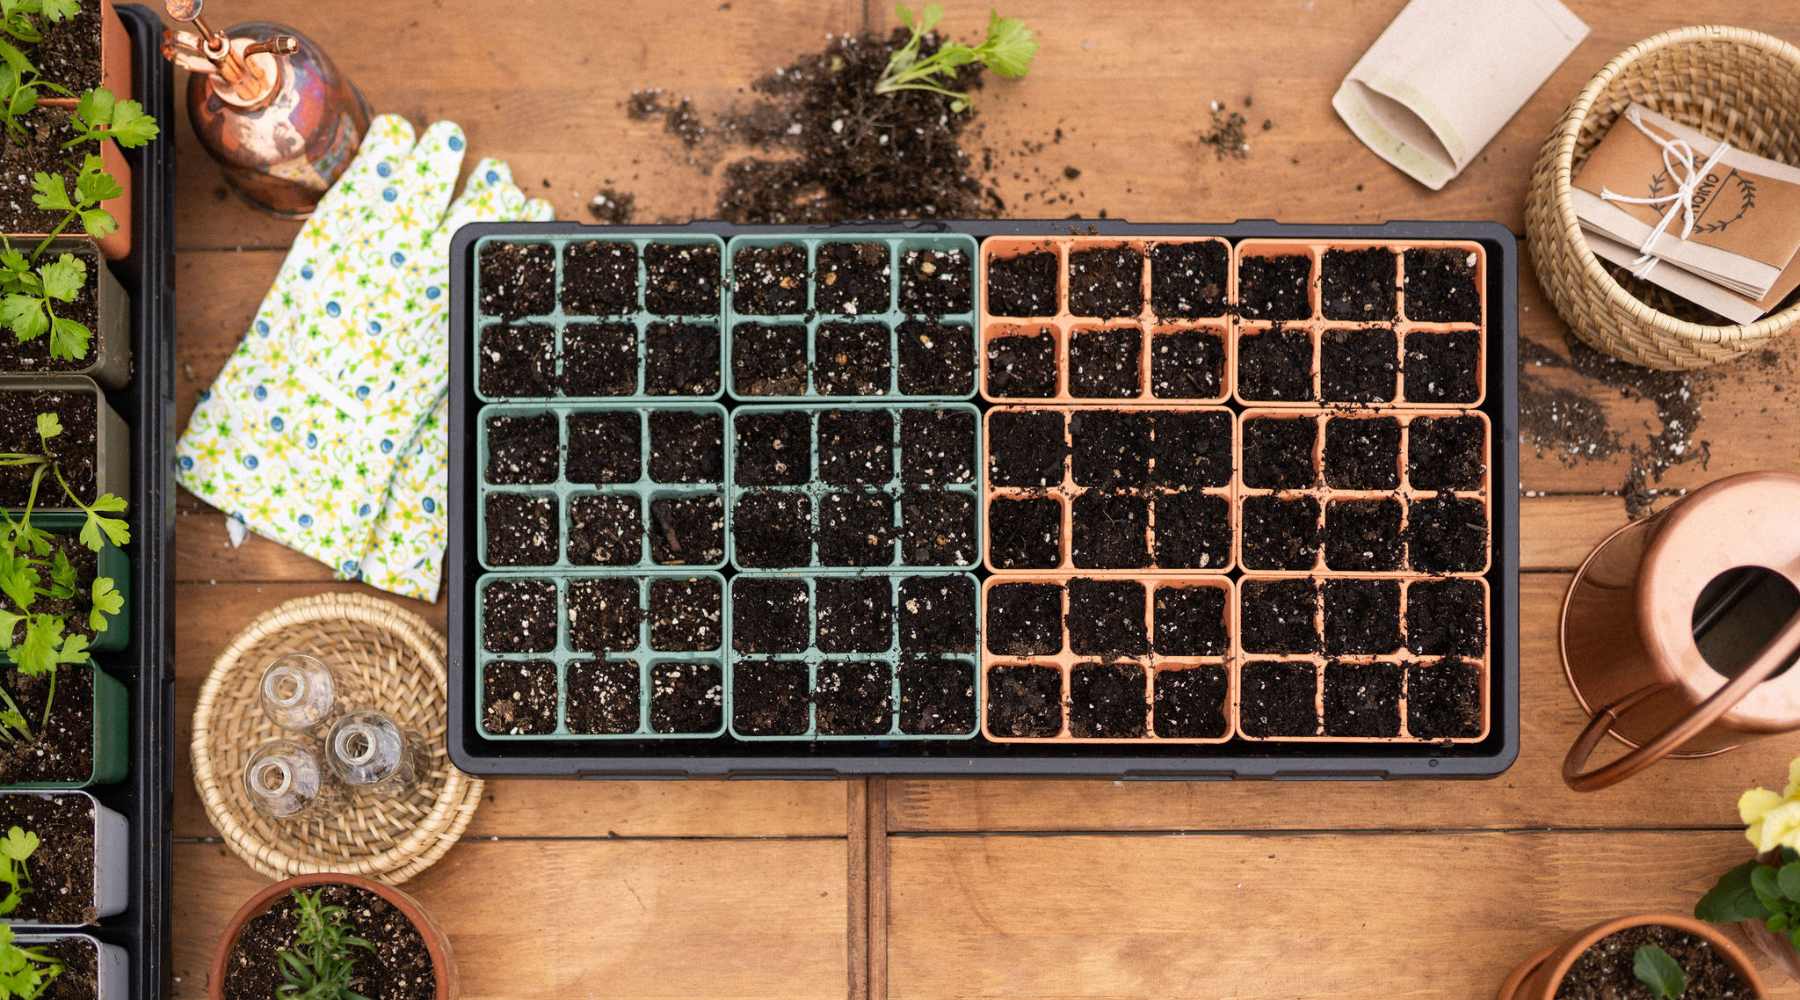 Earth tone seed starting trays and cups on wooden table with seed starting gear, seeds, and a watering can.